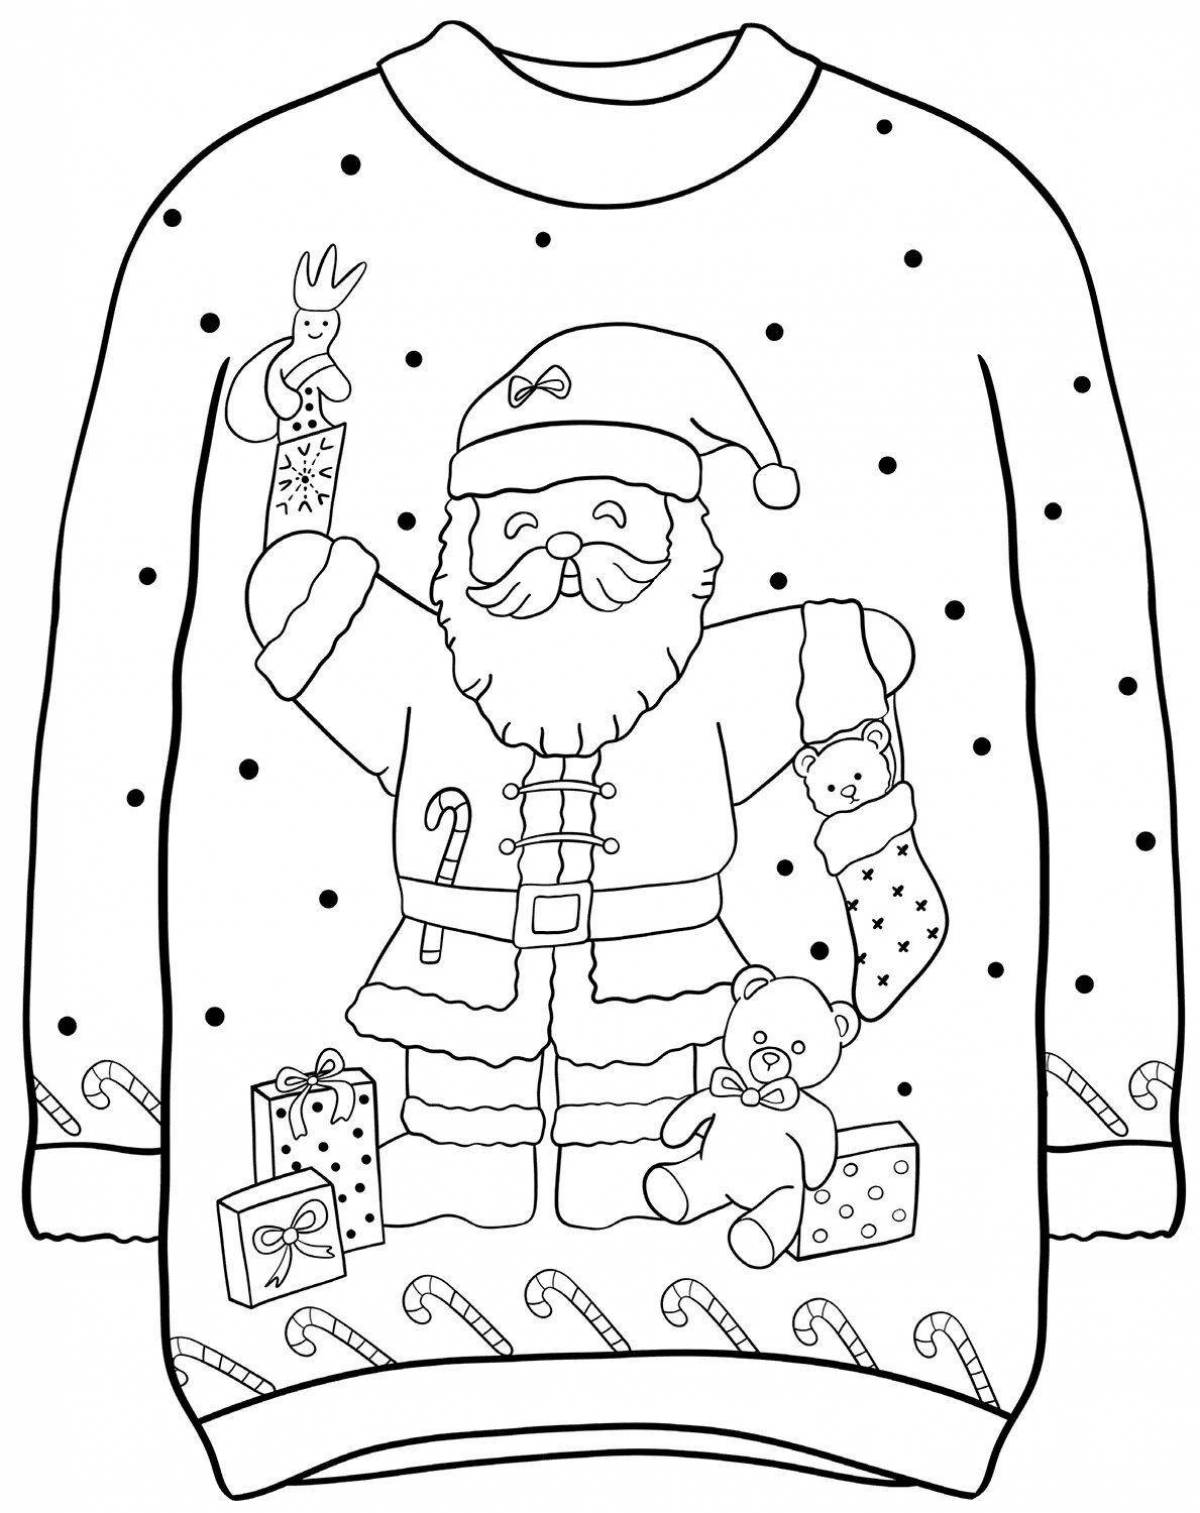 Fabulous sweater coloring page for kids